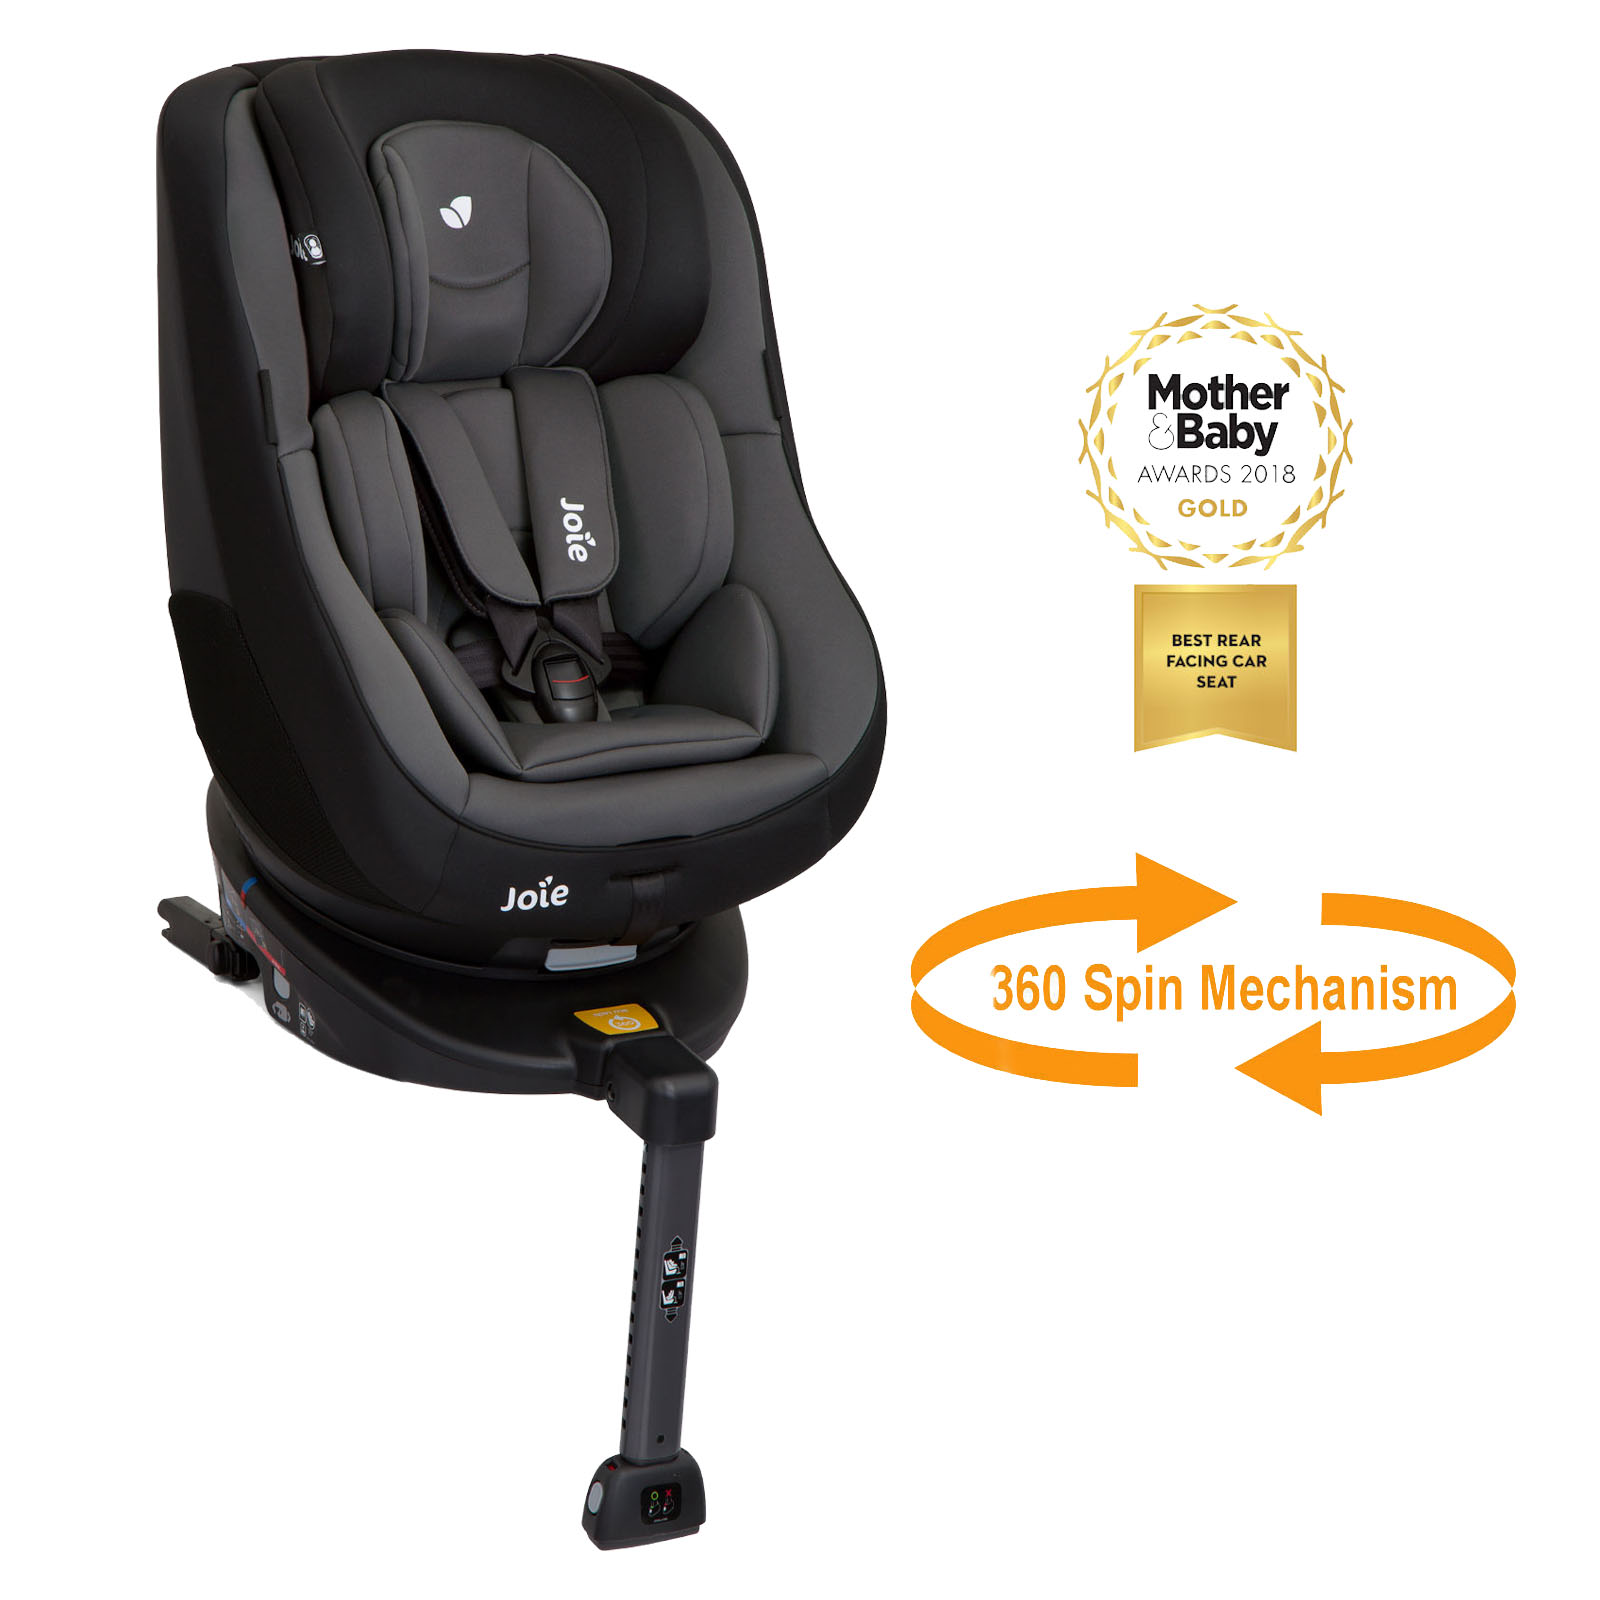 Joie Bold R 1/2/3 ISOFIX Car Seat - Ember